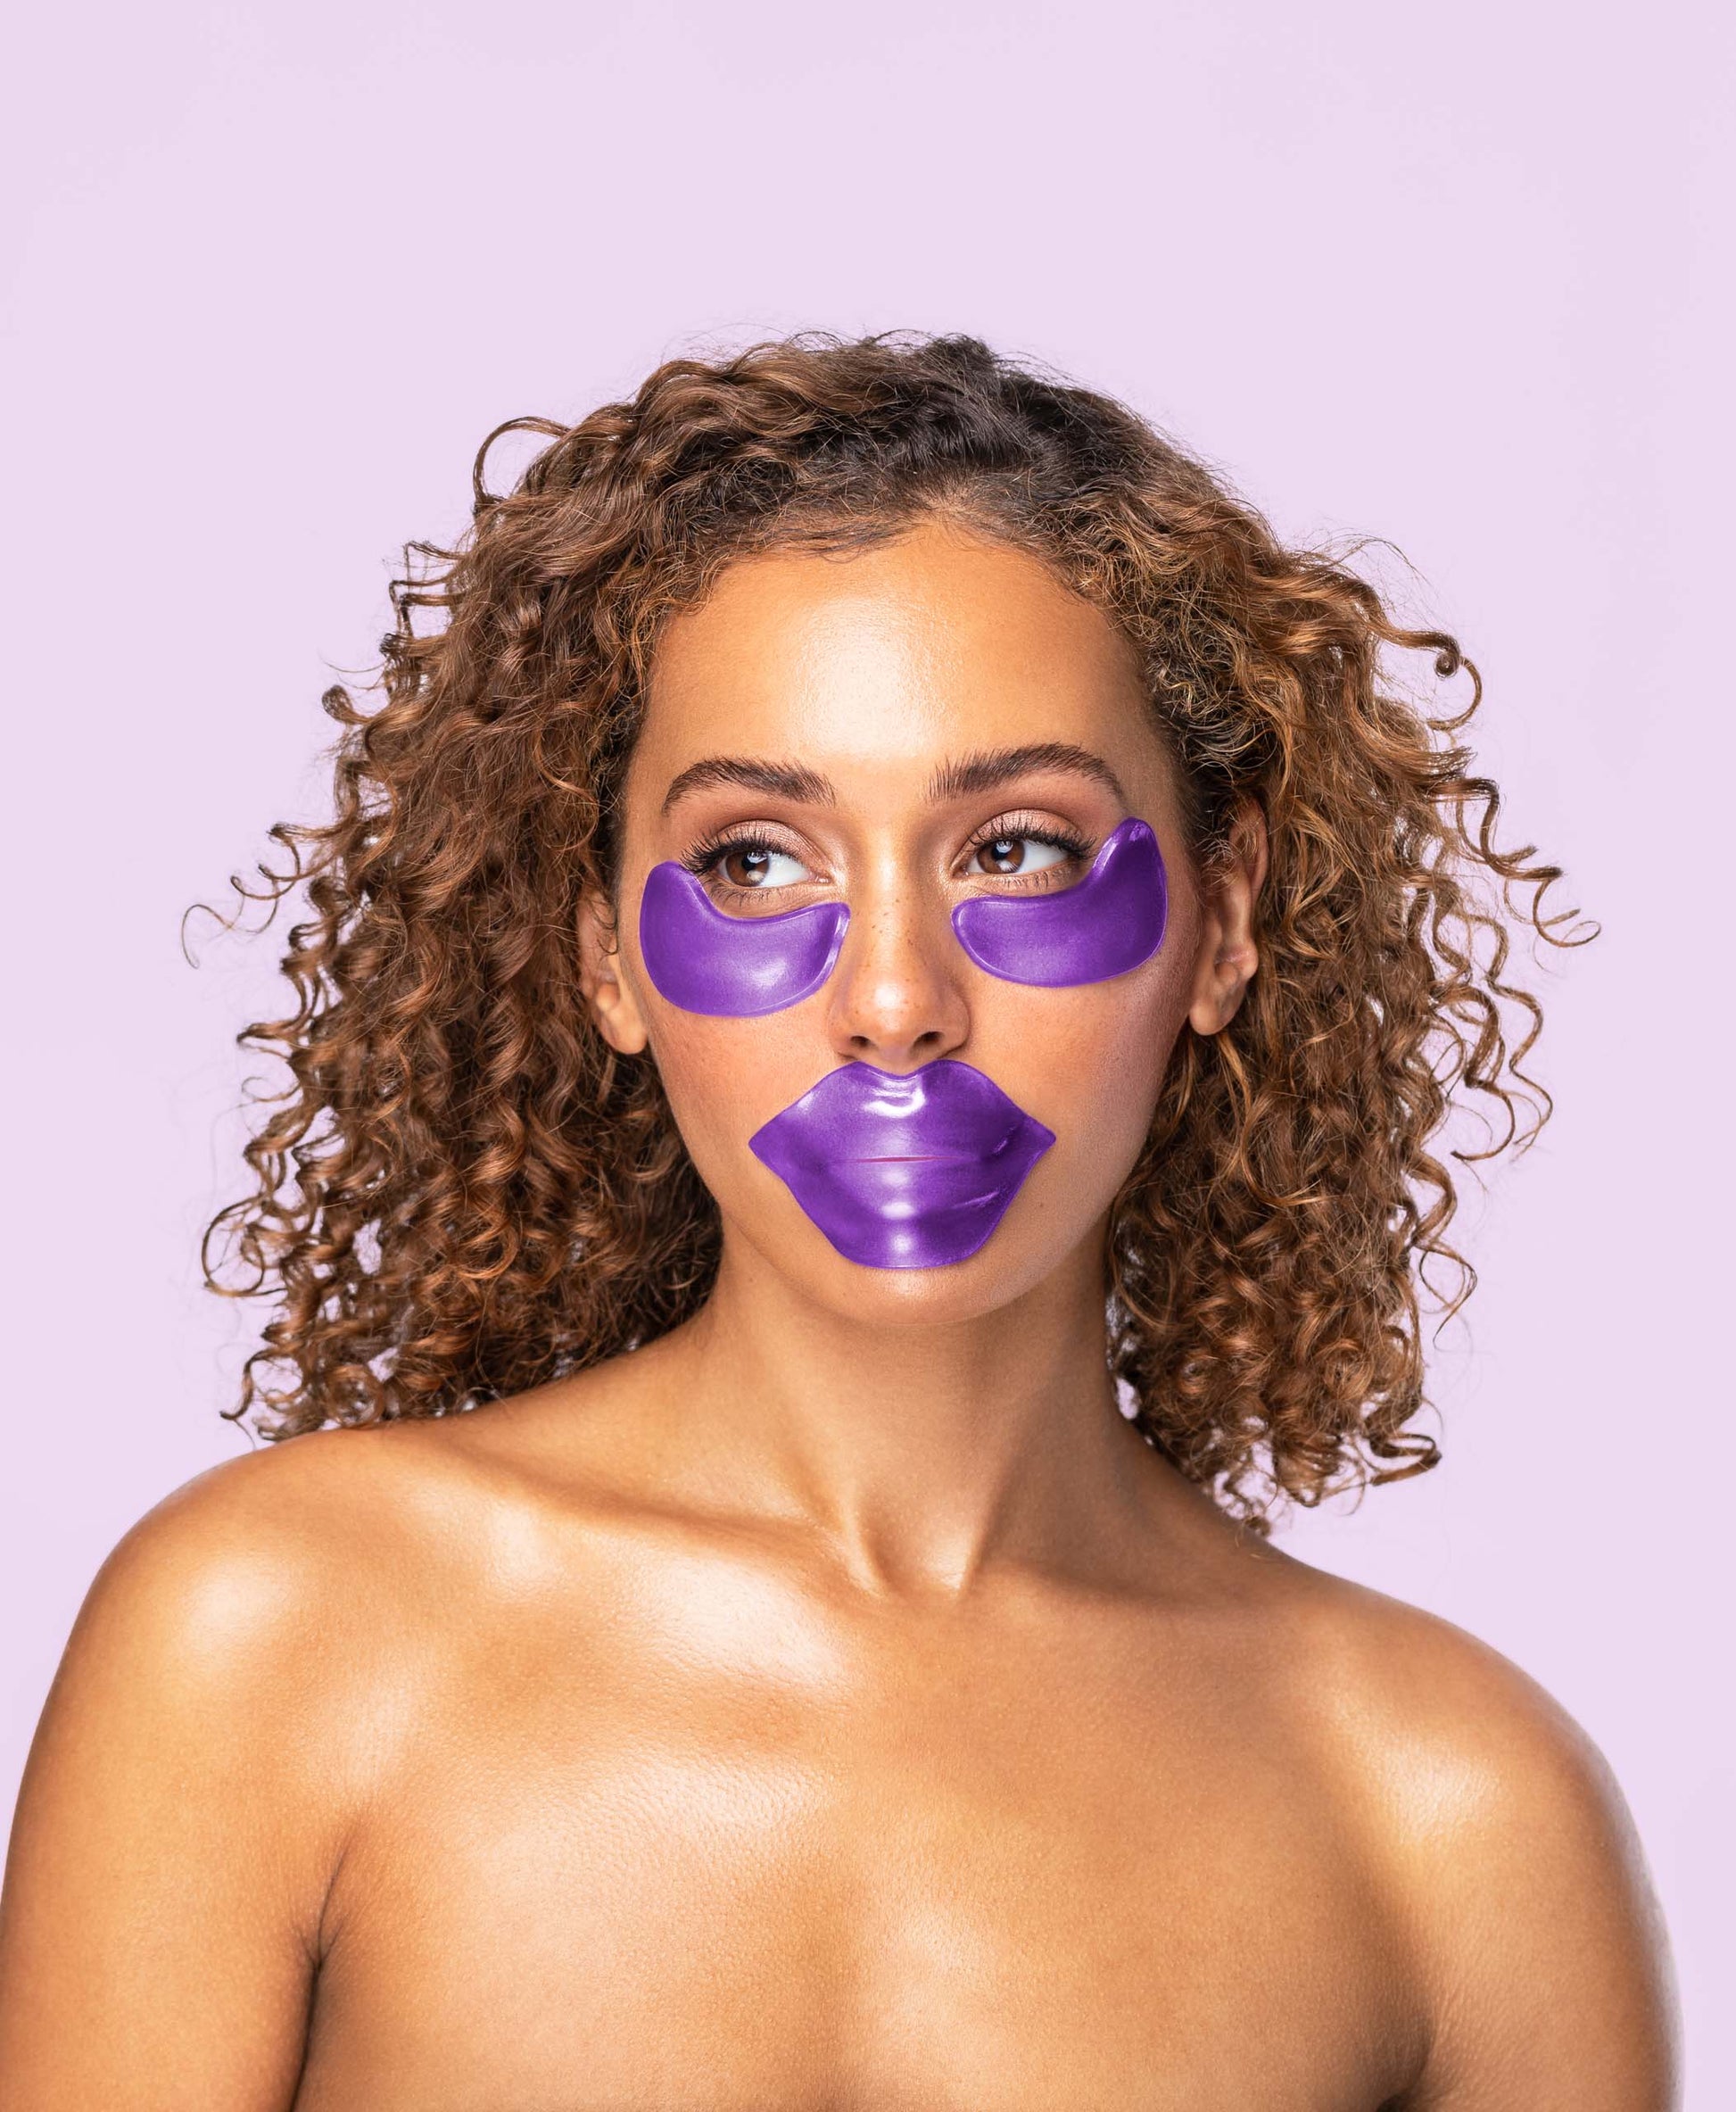 A woman using eye and lip masks from the Amethyst Hydrate collection.